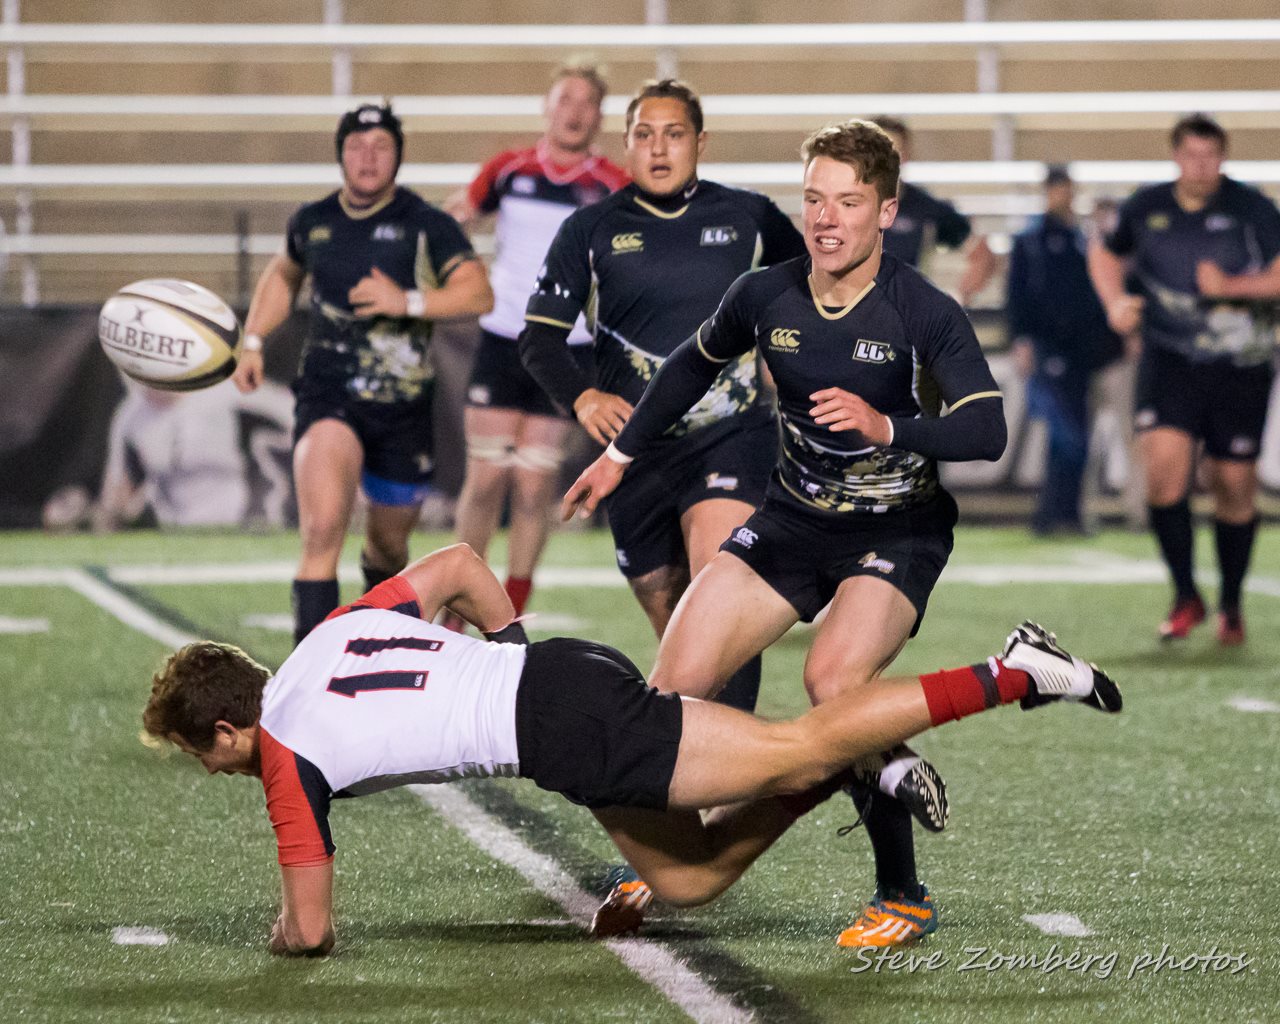 Lindenwood v Davenport Labry Shield rugby game March 11 2017. Steven Zomberg photo.